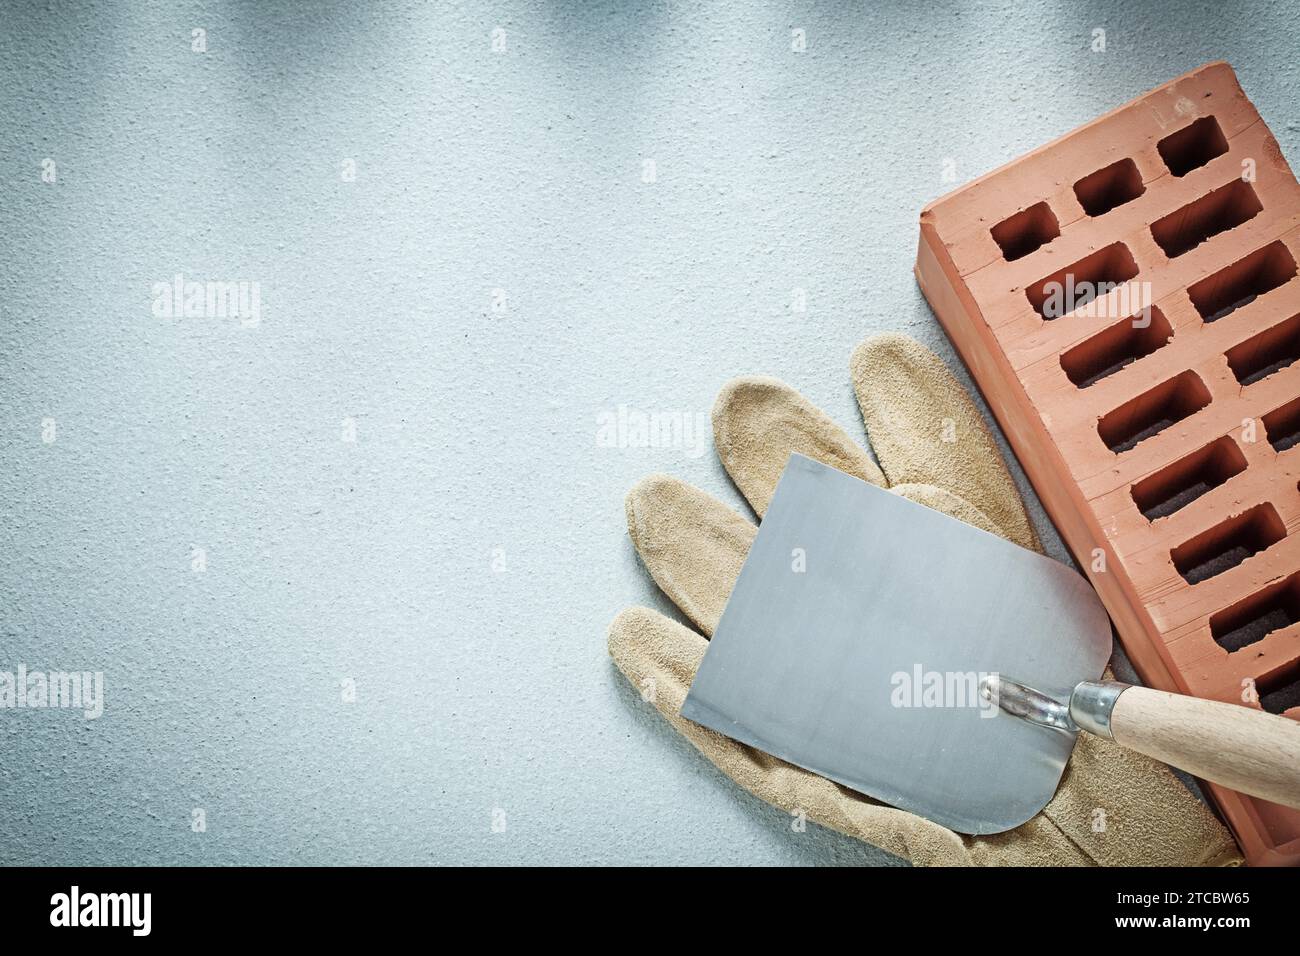 Construction brick leather protective gloves plastering trowel on concrete surface bricklaying concept Stock Photo